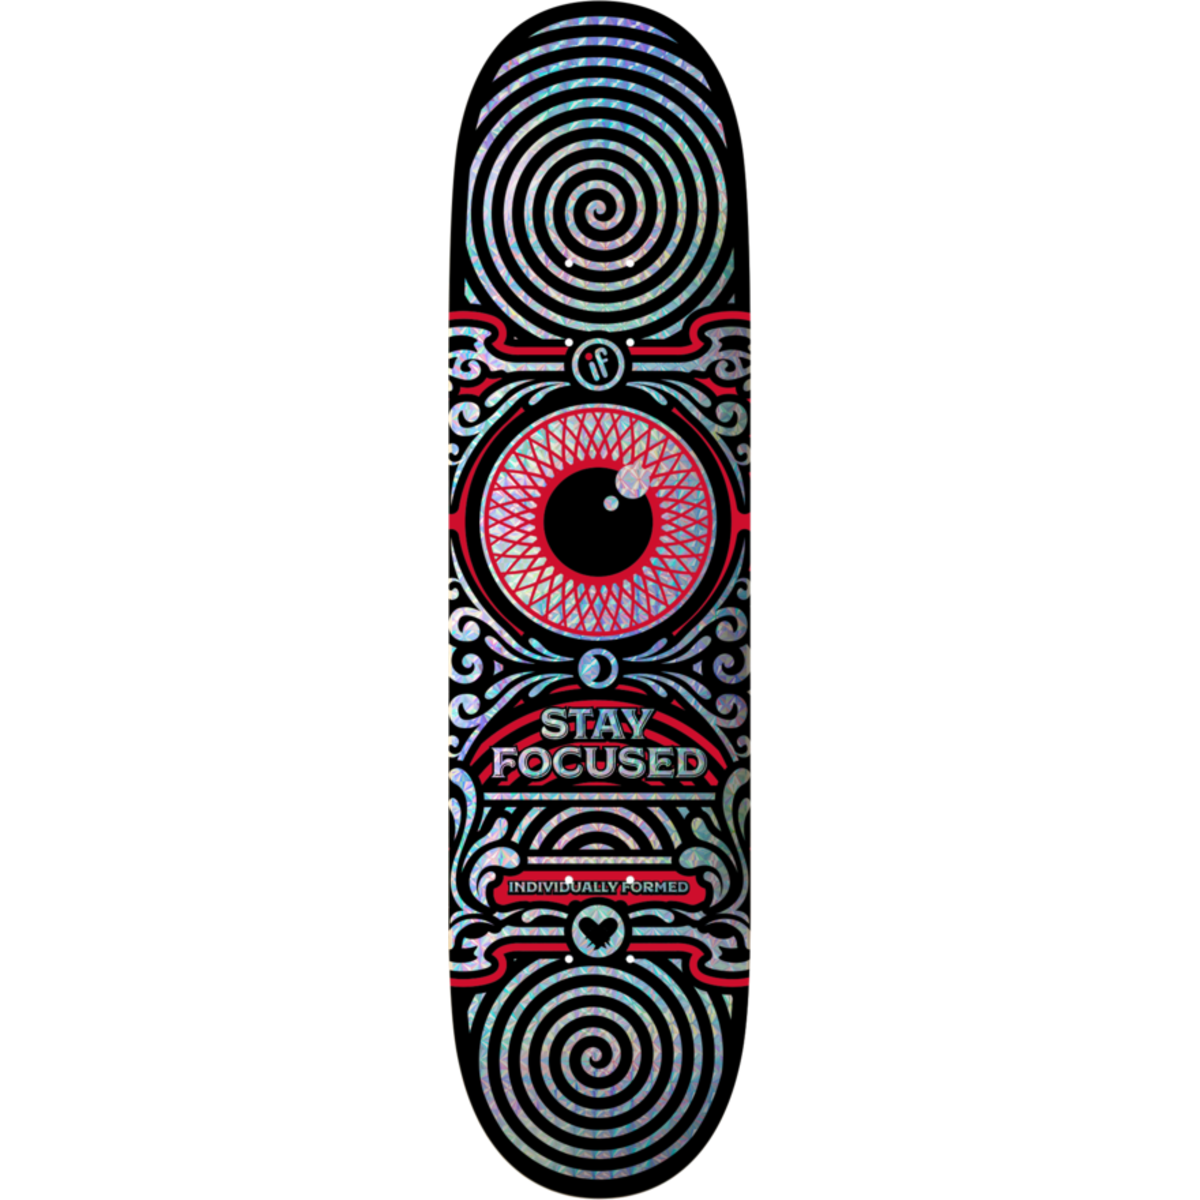 IF SKATE CO -STAY FOCUSED - RED - HOLOGRAPHIC